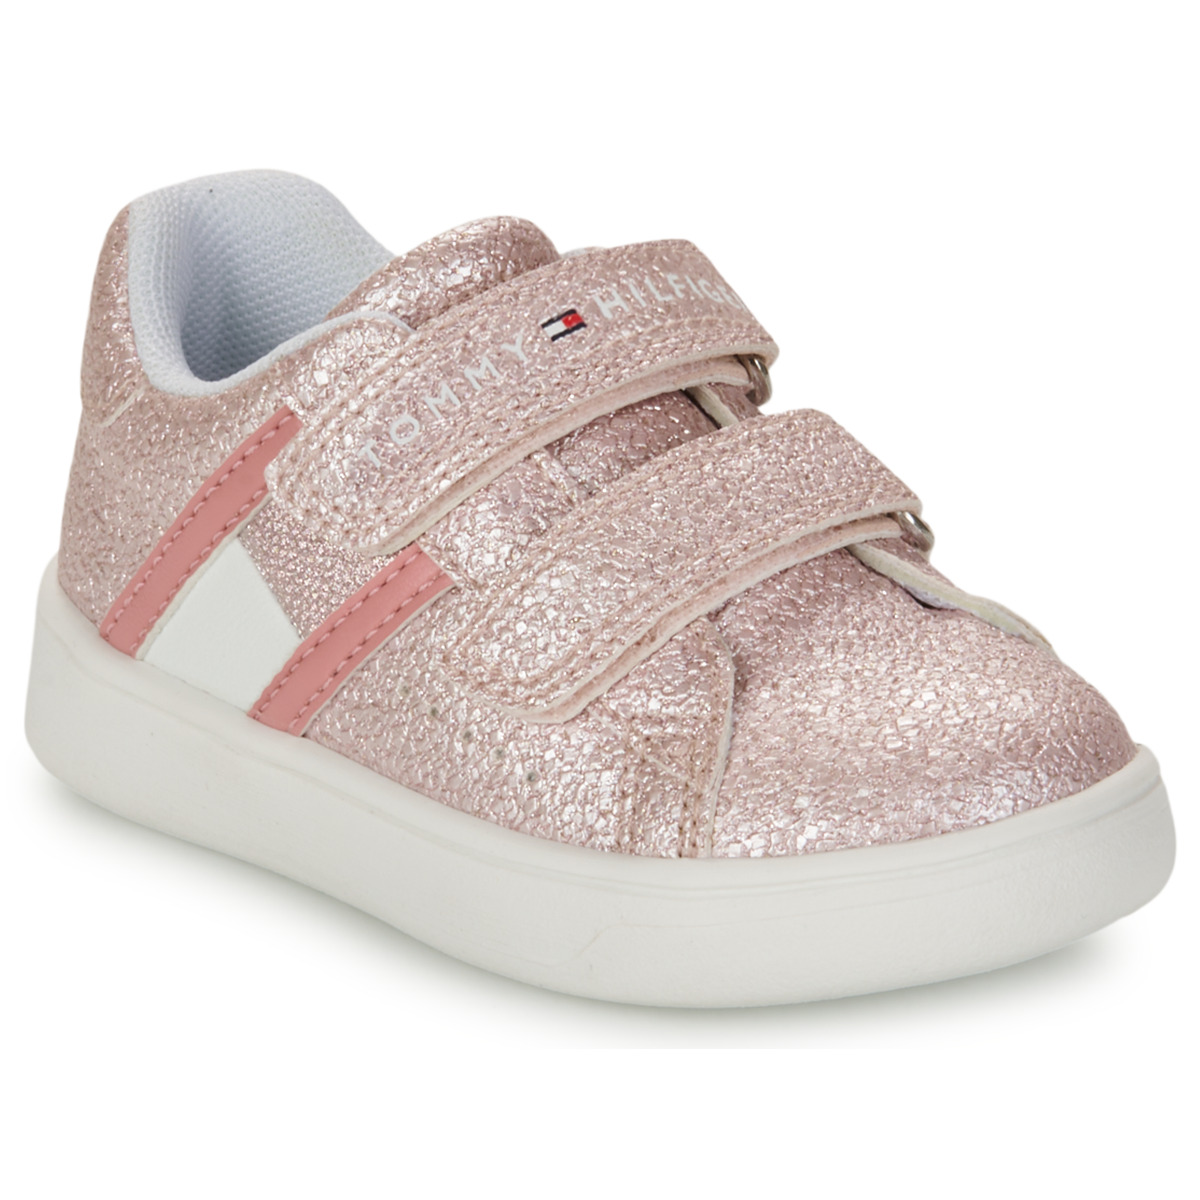 Chaussures Fille Handtasche TOMMY JEANS Tjw Item Gold Crossover AW0AW10664 0HS LOGAN Rose glitter